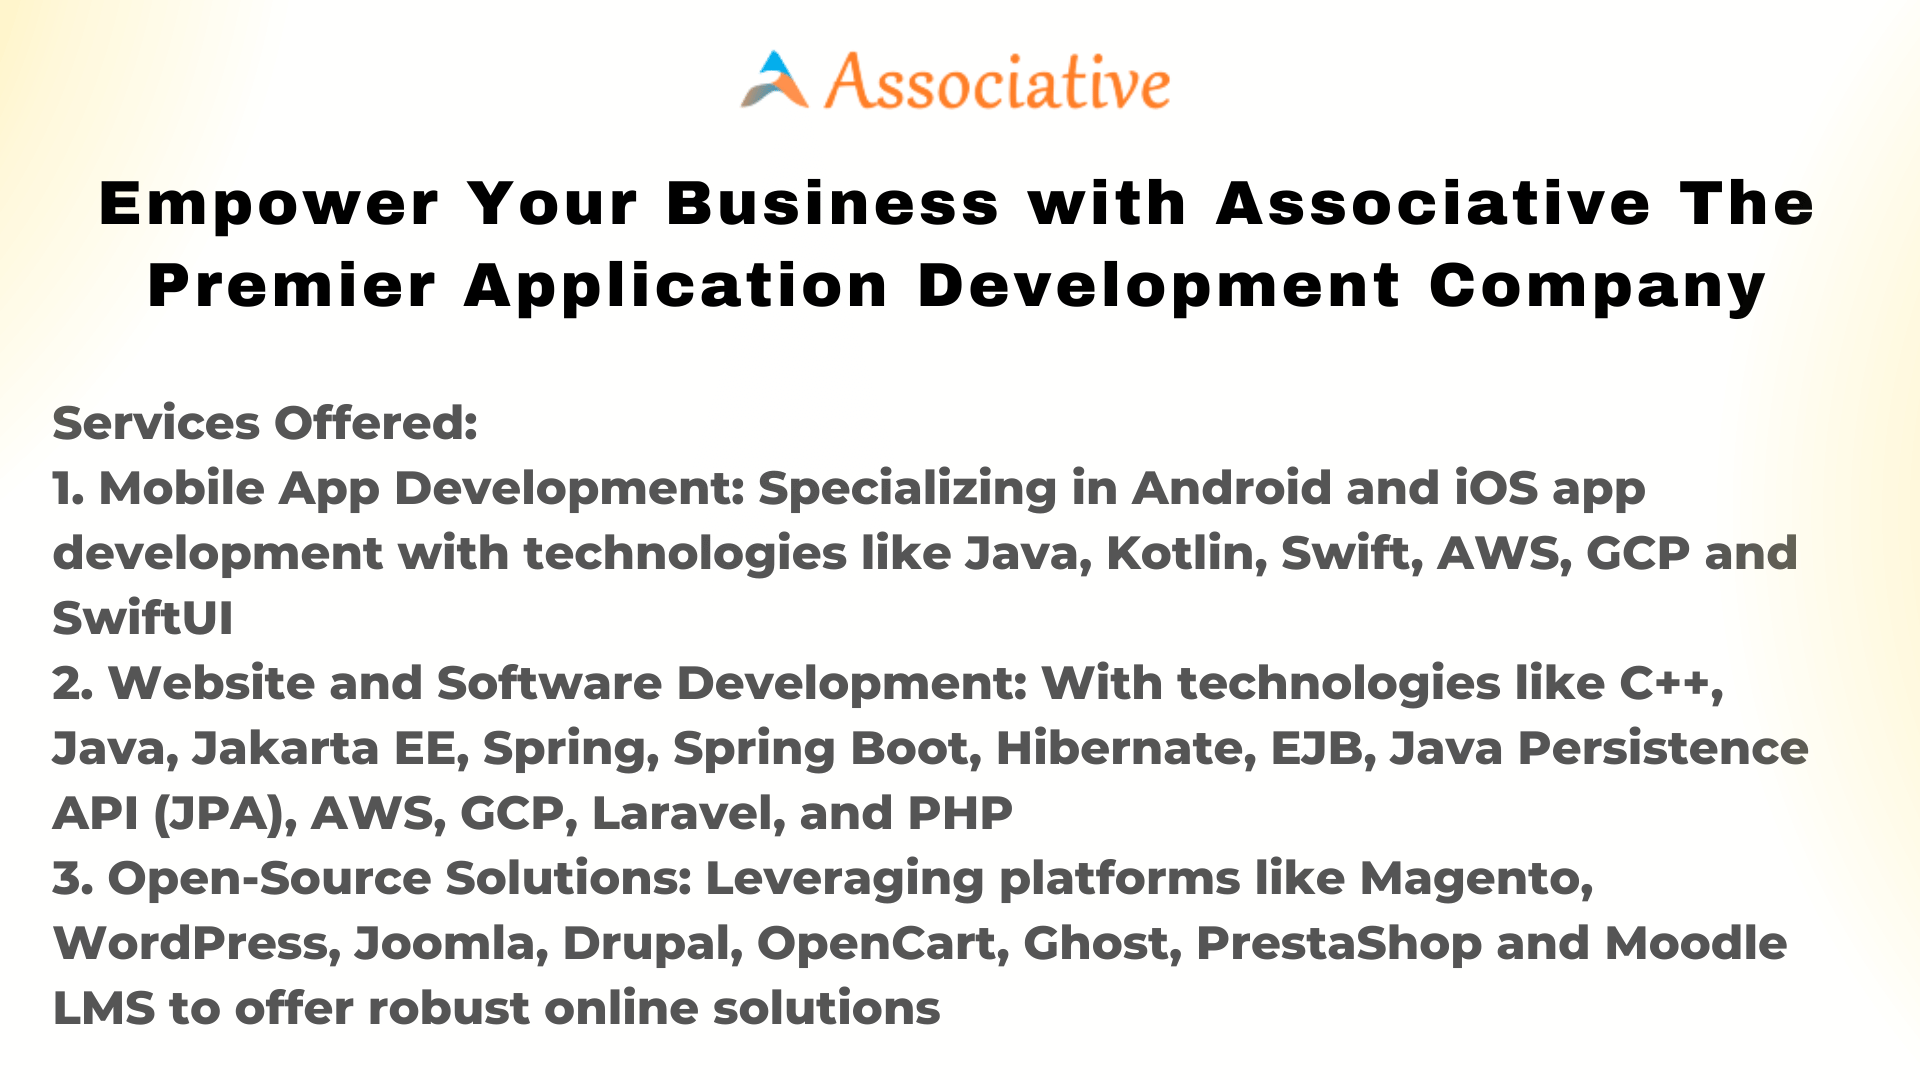 Empower Your Business with Associative The Premier Application Development Company